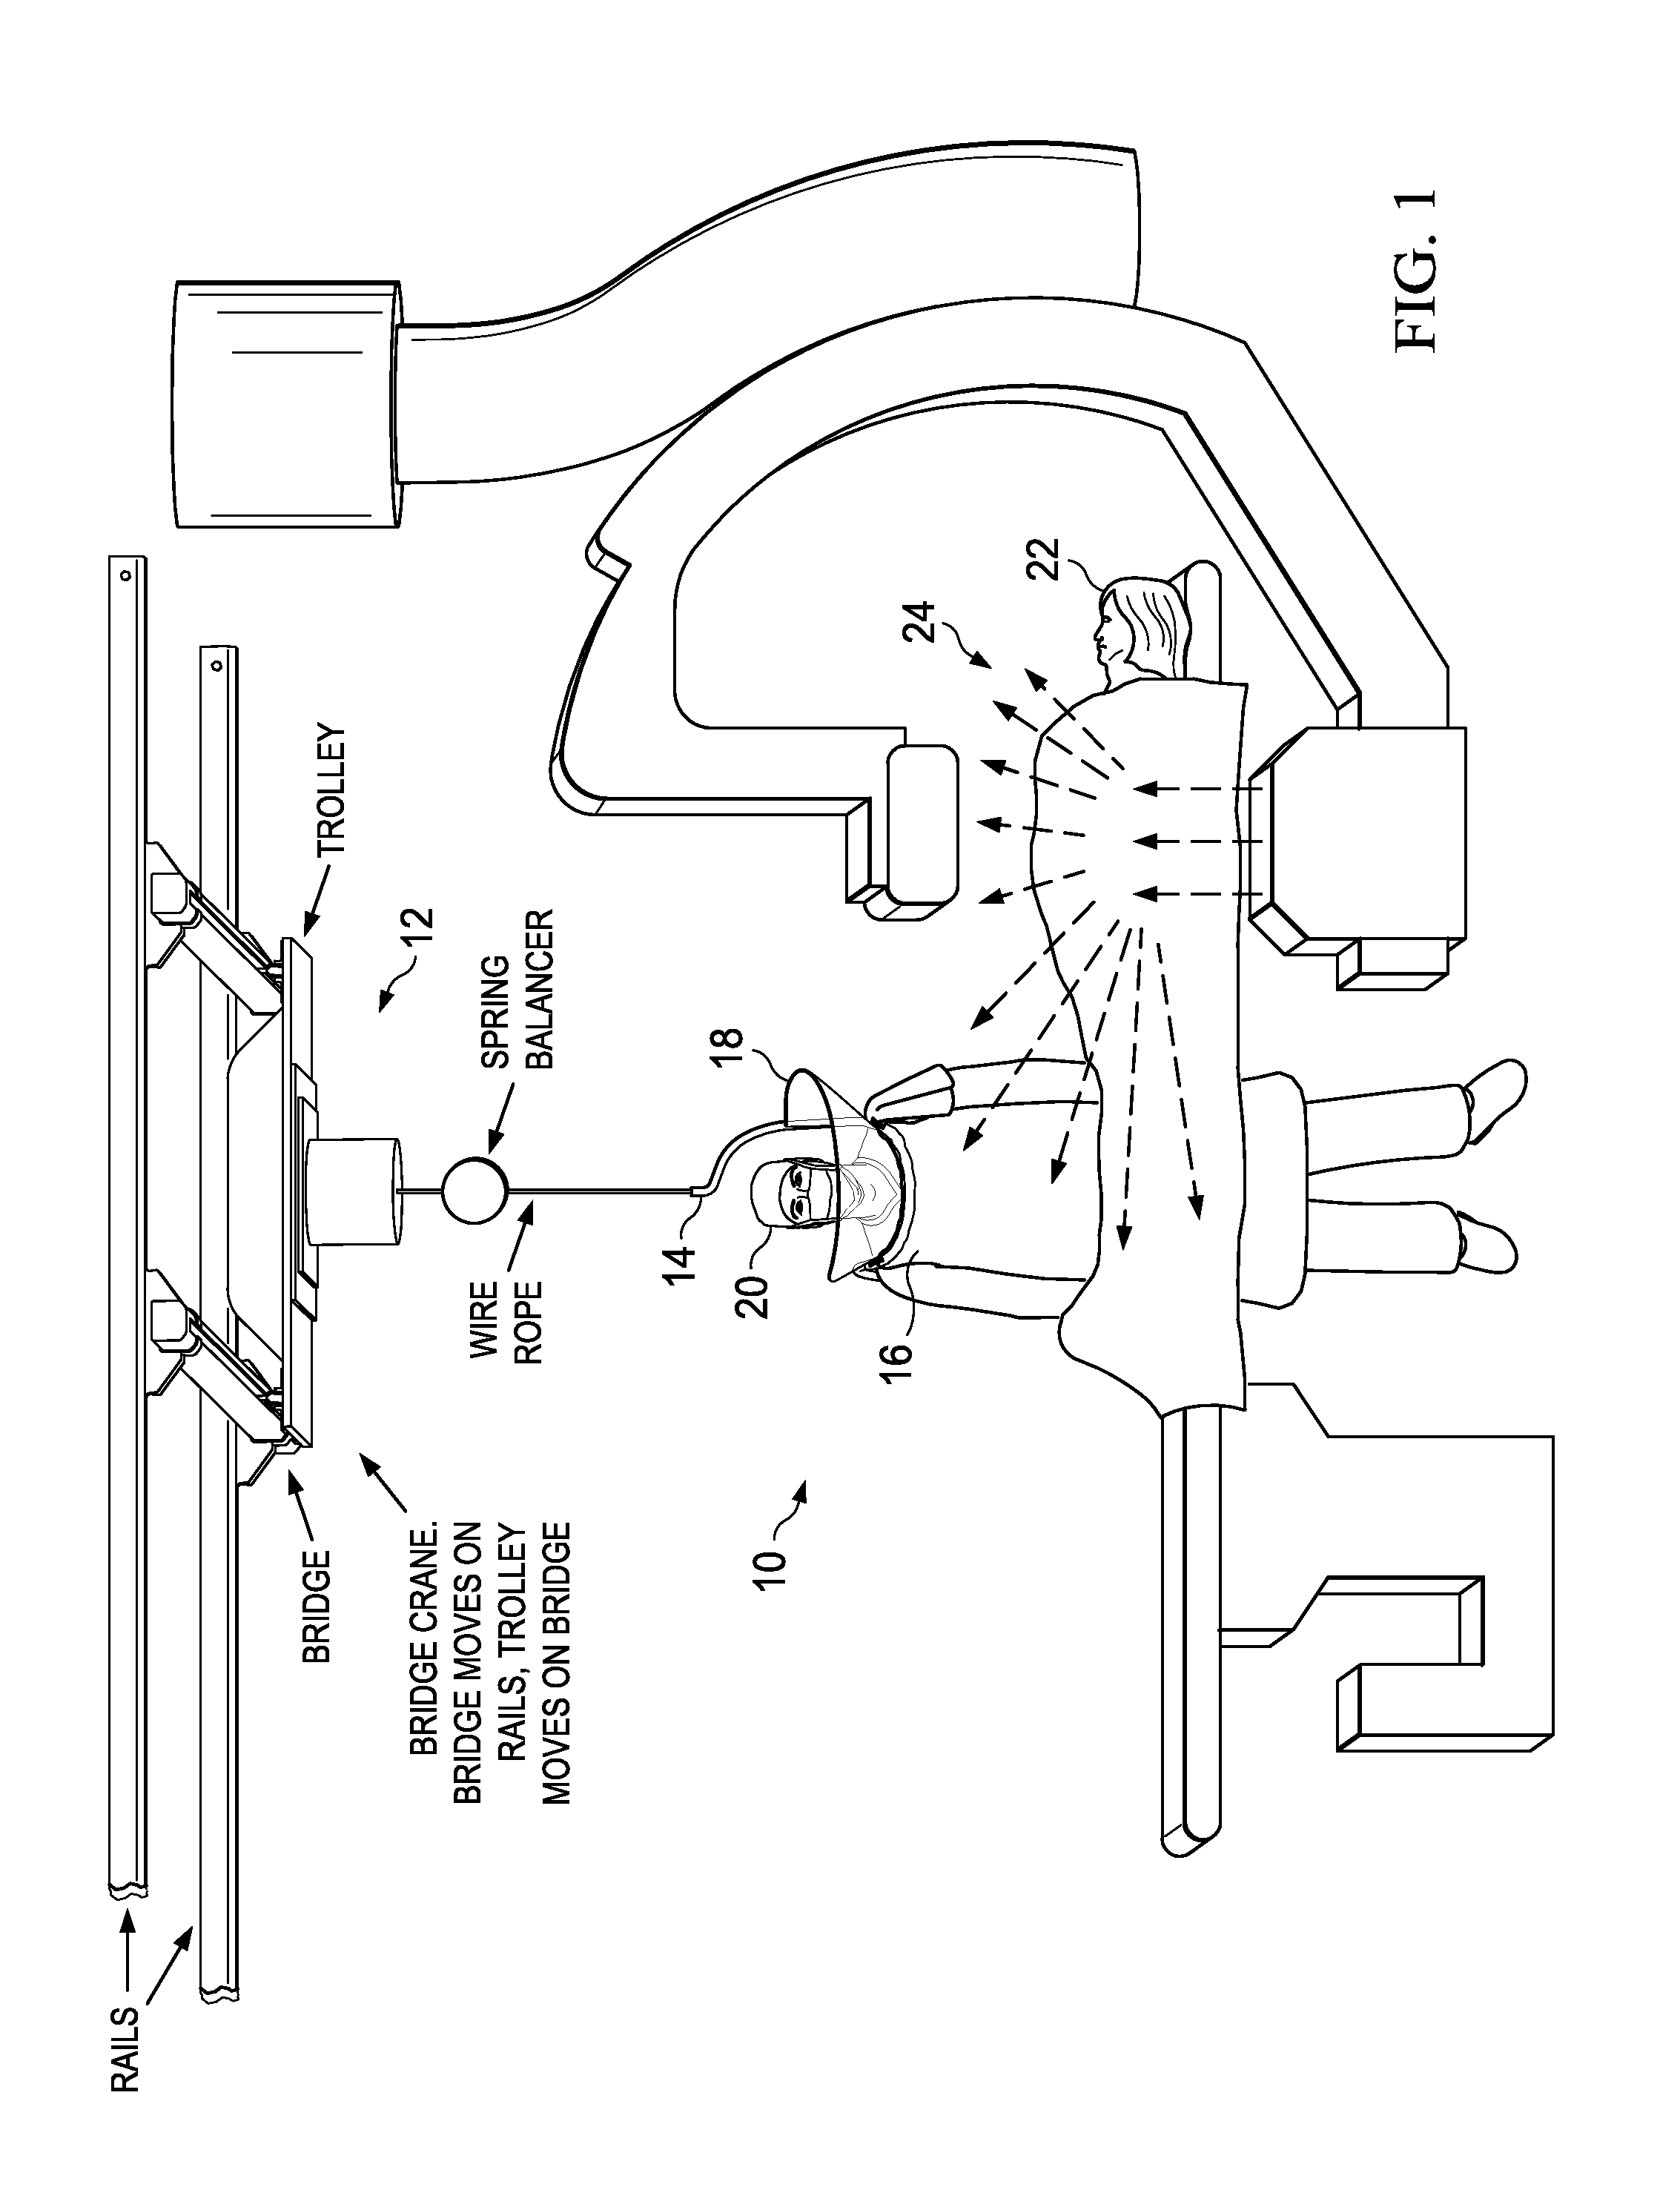 System and Method for Providing a Suspended Personal Radiation Protection System